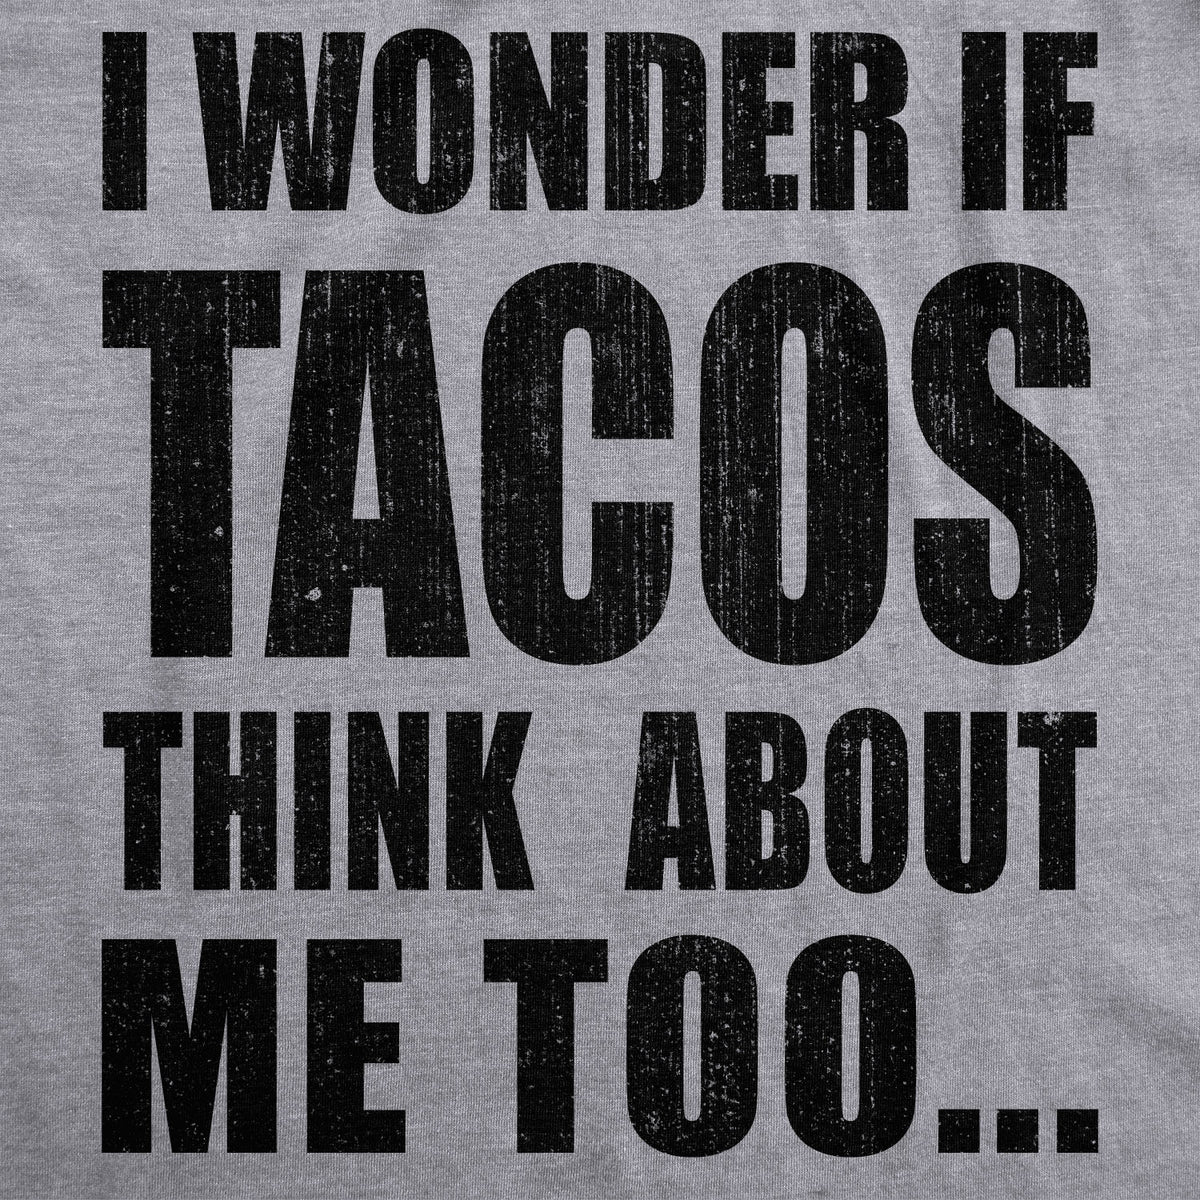 I Wonder If Tacos Think About Me Too Men&#39;s T Shirt